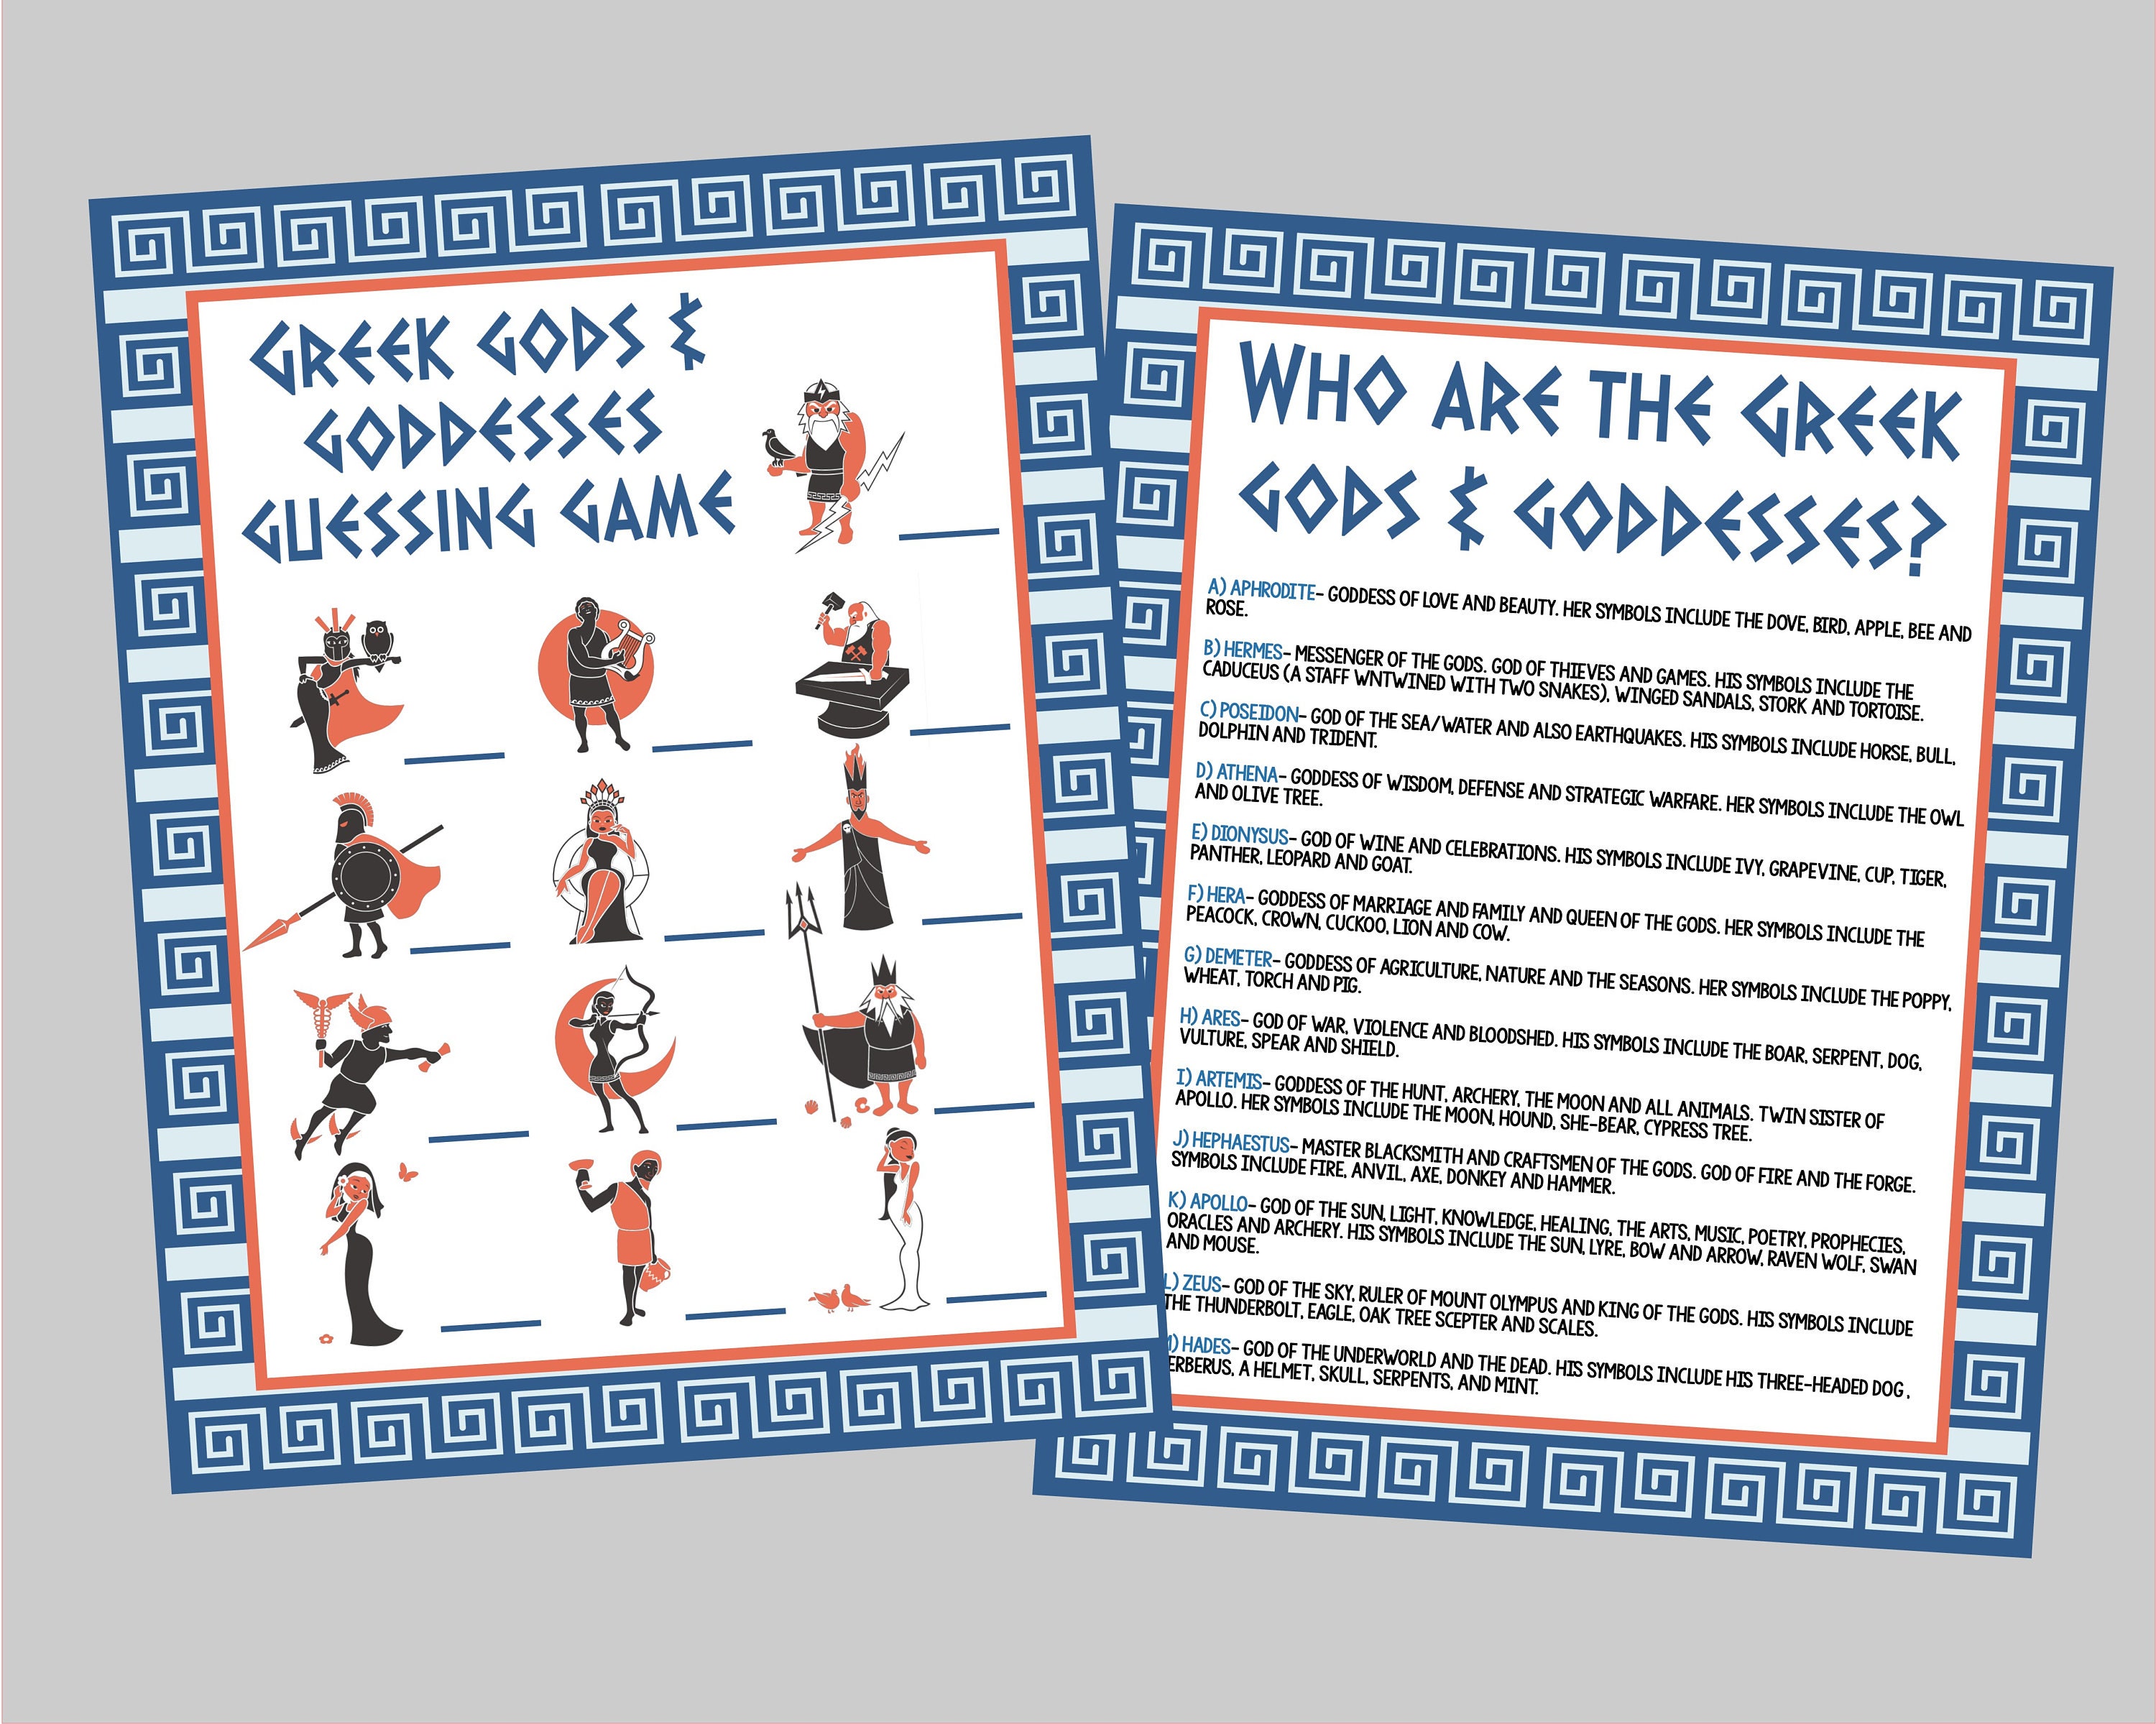 Greek Goddesses Stickers/pack of 8 Paper Stickers With 8 Beautiful Greek  Goddesses Illustrations, Totally Handmade 